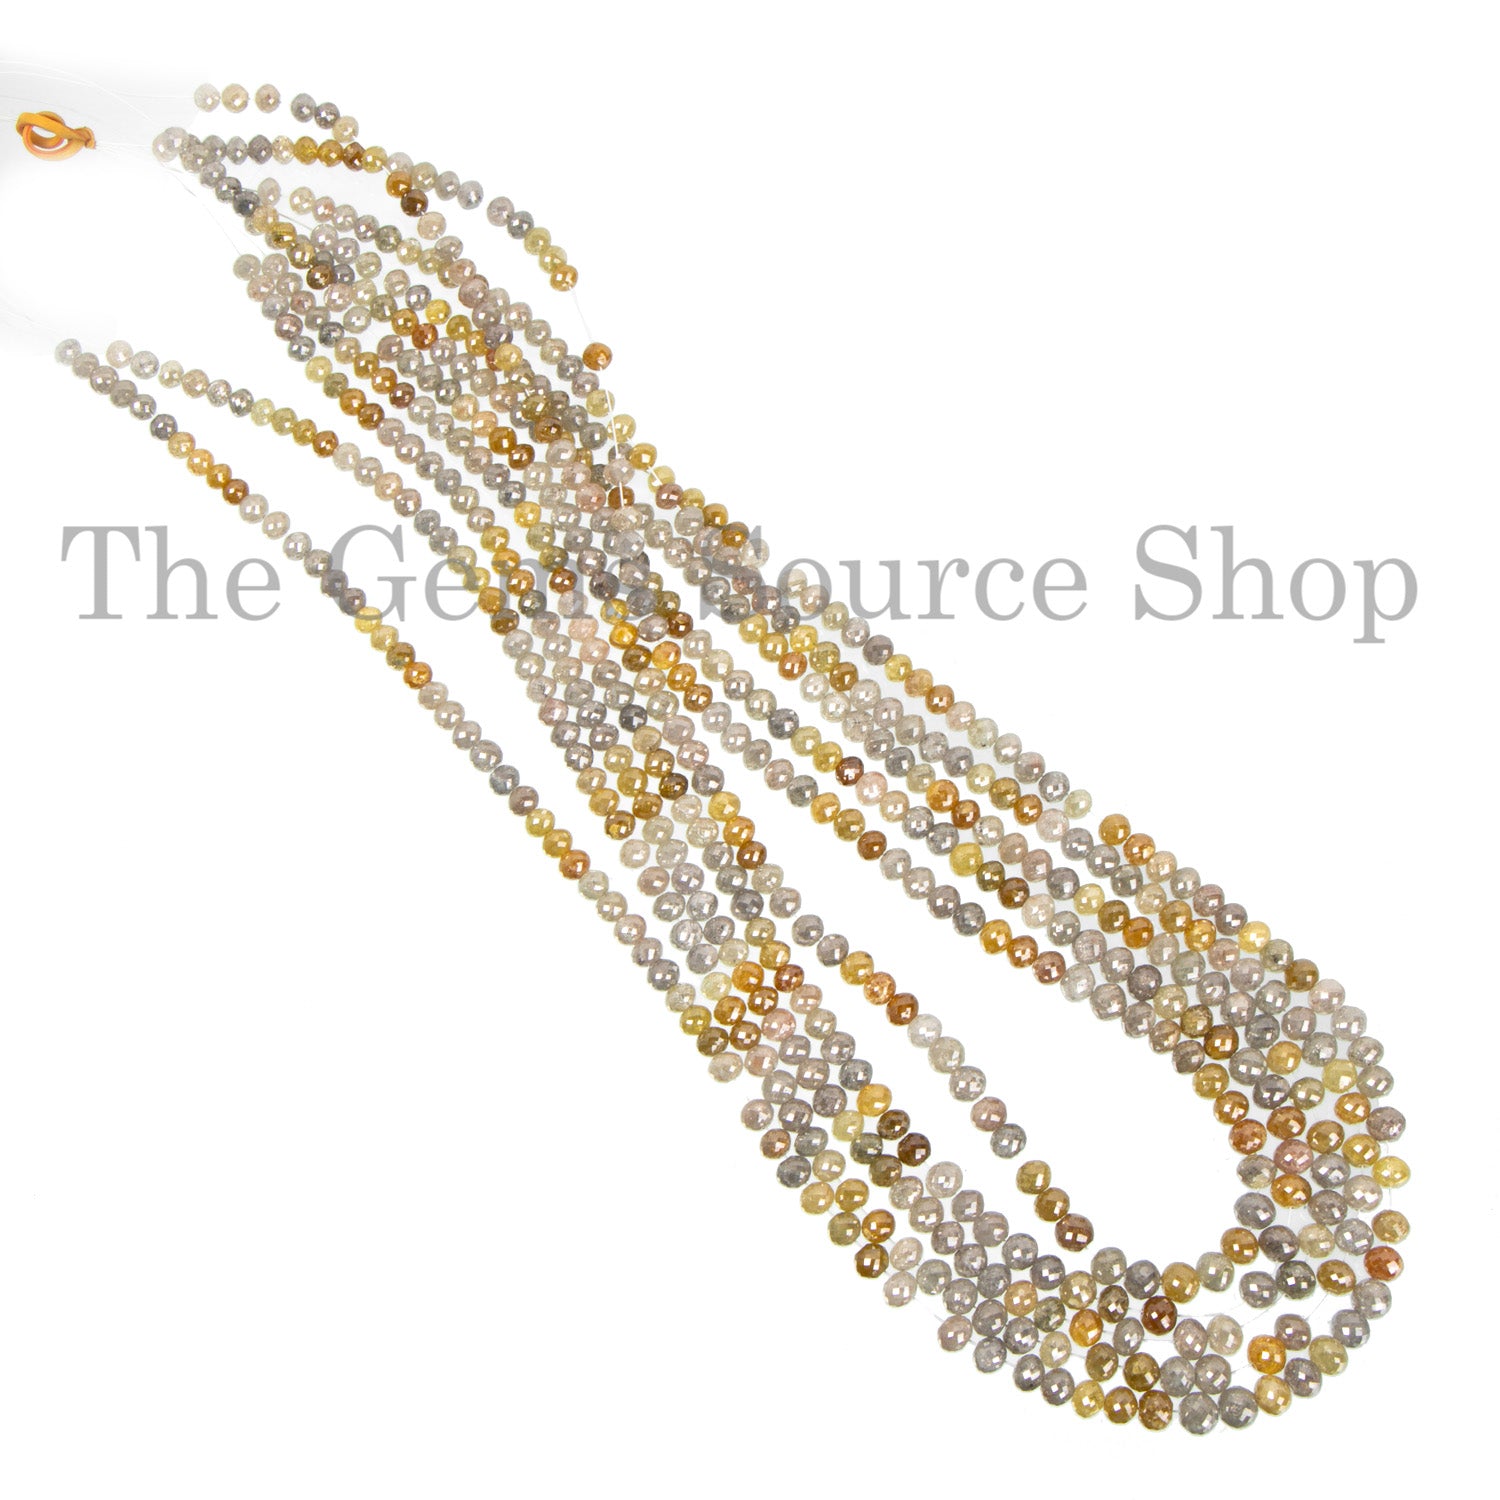 Top Quality Fancy Diamond Beads, Faceted Rondelle Beads, Diamond Rondelle, Natural Diamond Beads